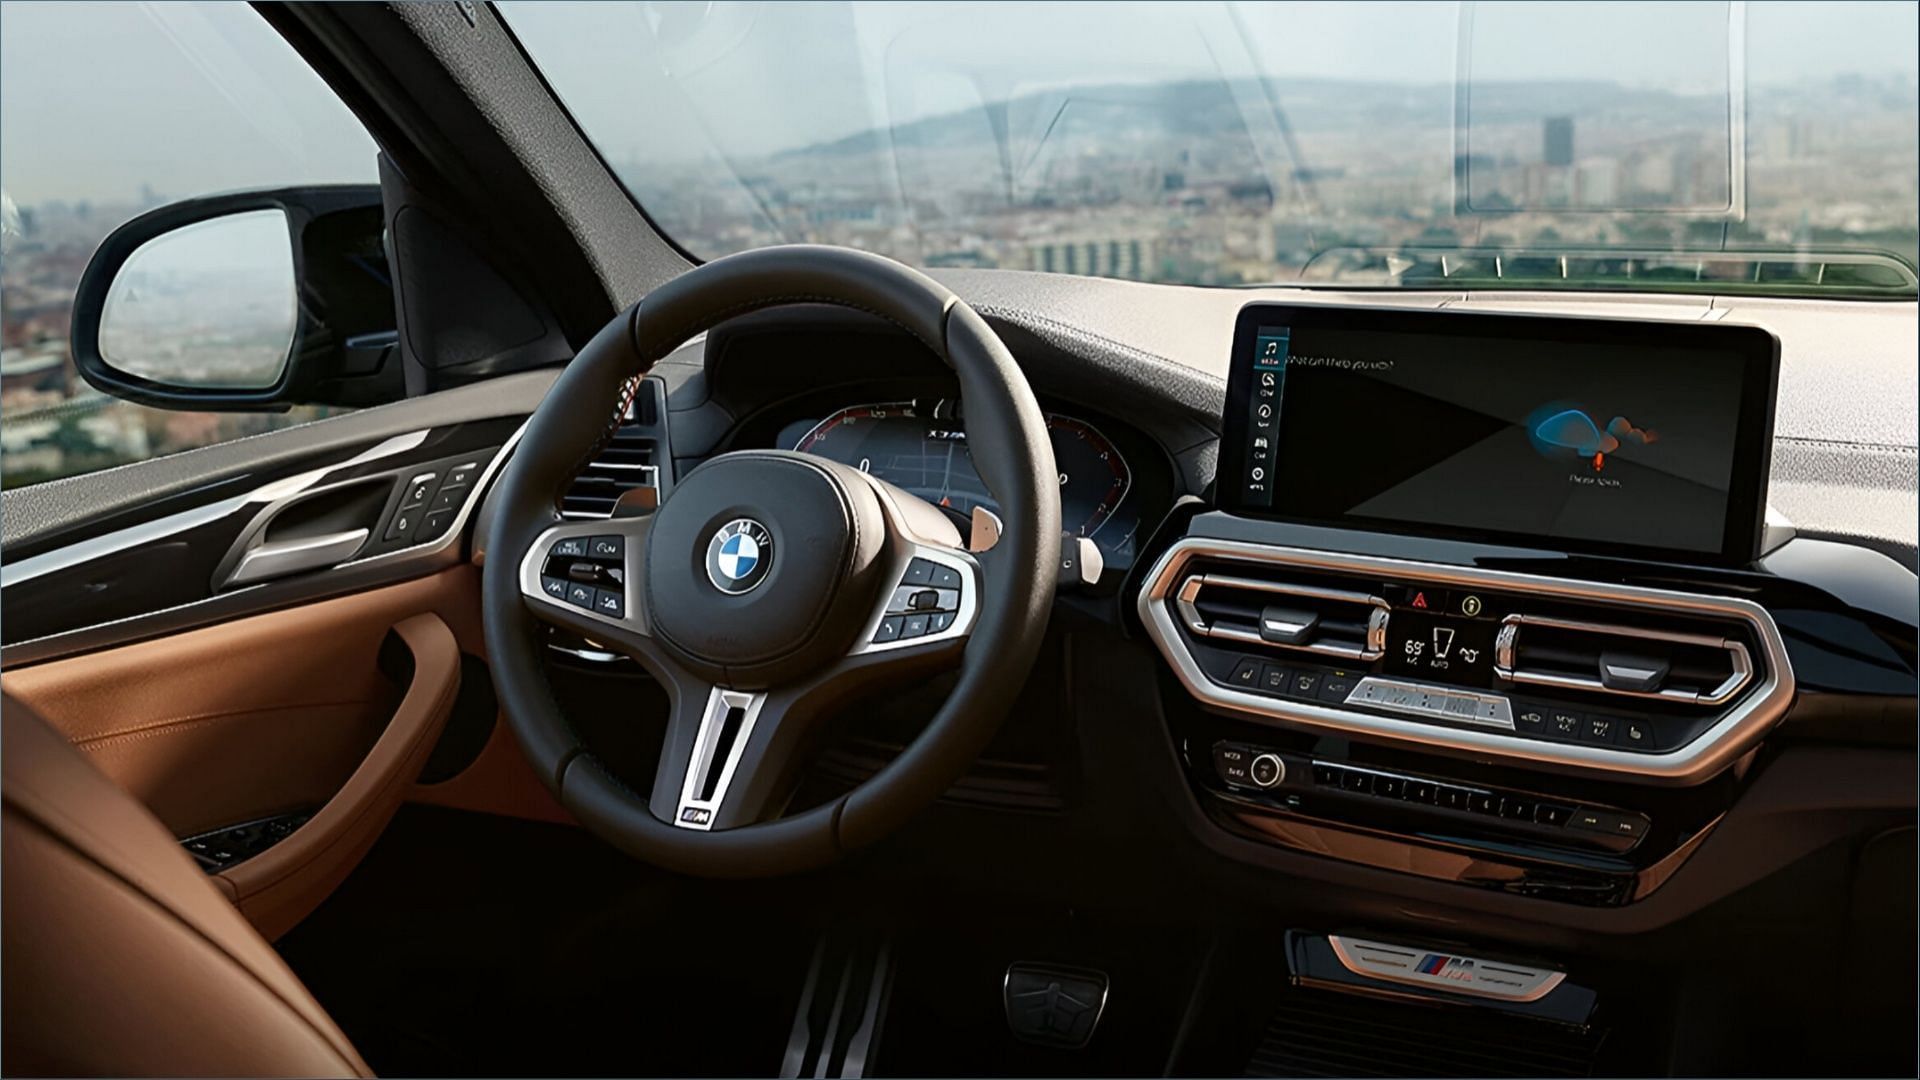 The SUVs affected by the recall can put the driver and passengers at risk due to an issue with the airbags (Image via BMW)